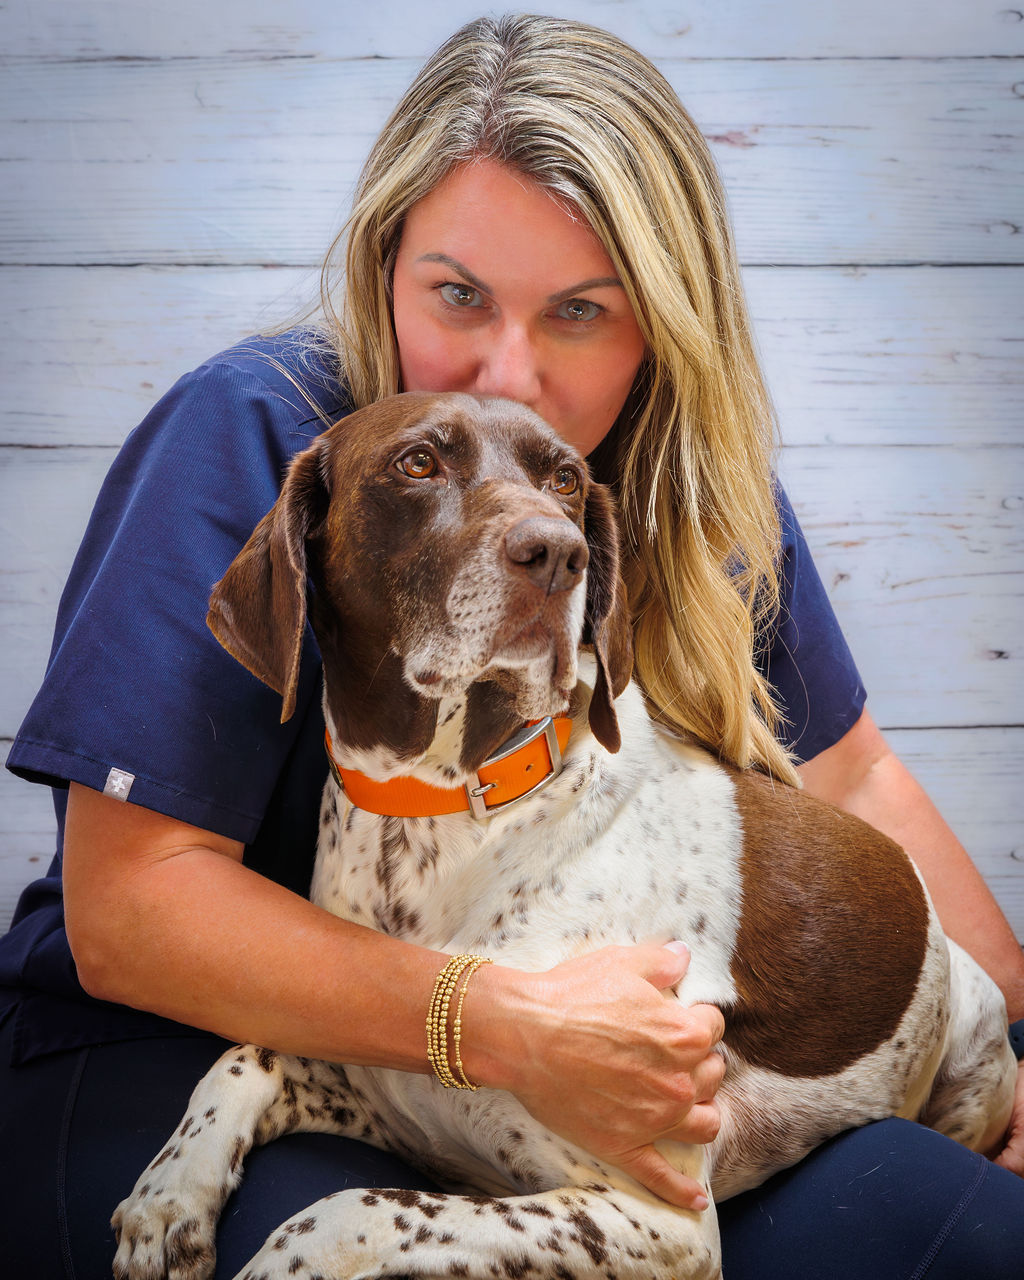 Veterinarian Holding a Dog